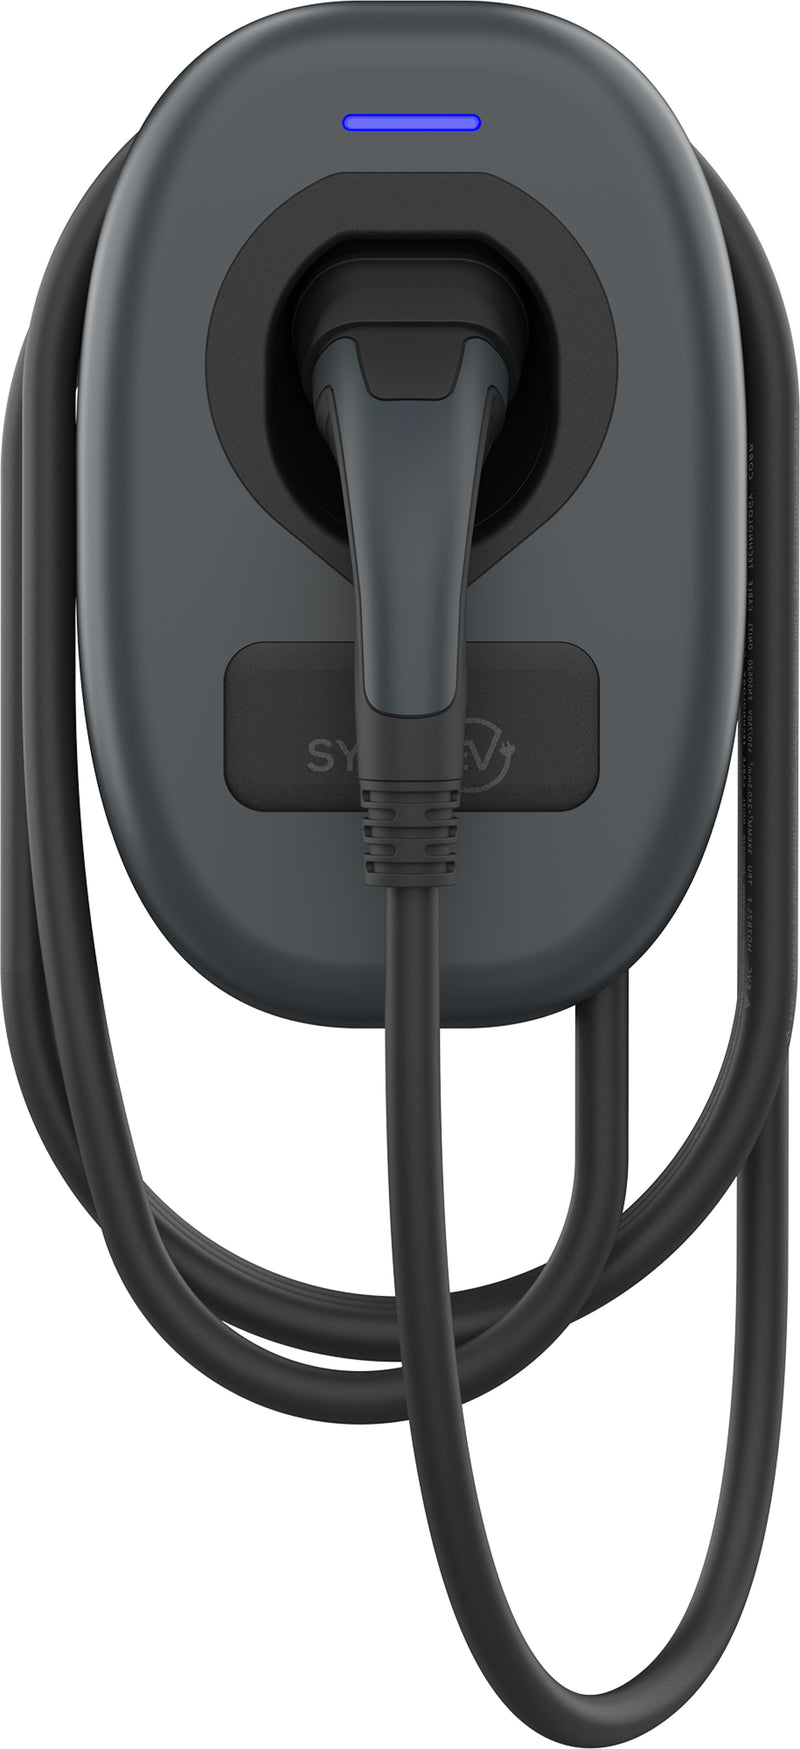 BG SyncEV EV Wall Charger Single Phase 7.4kW Tethered Wi-Fi + 4G*, 7.5m cable (incl. CT clamp)